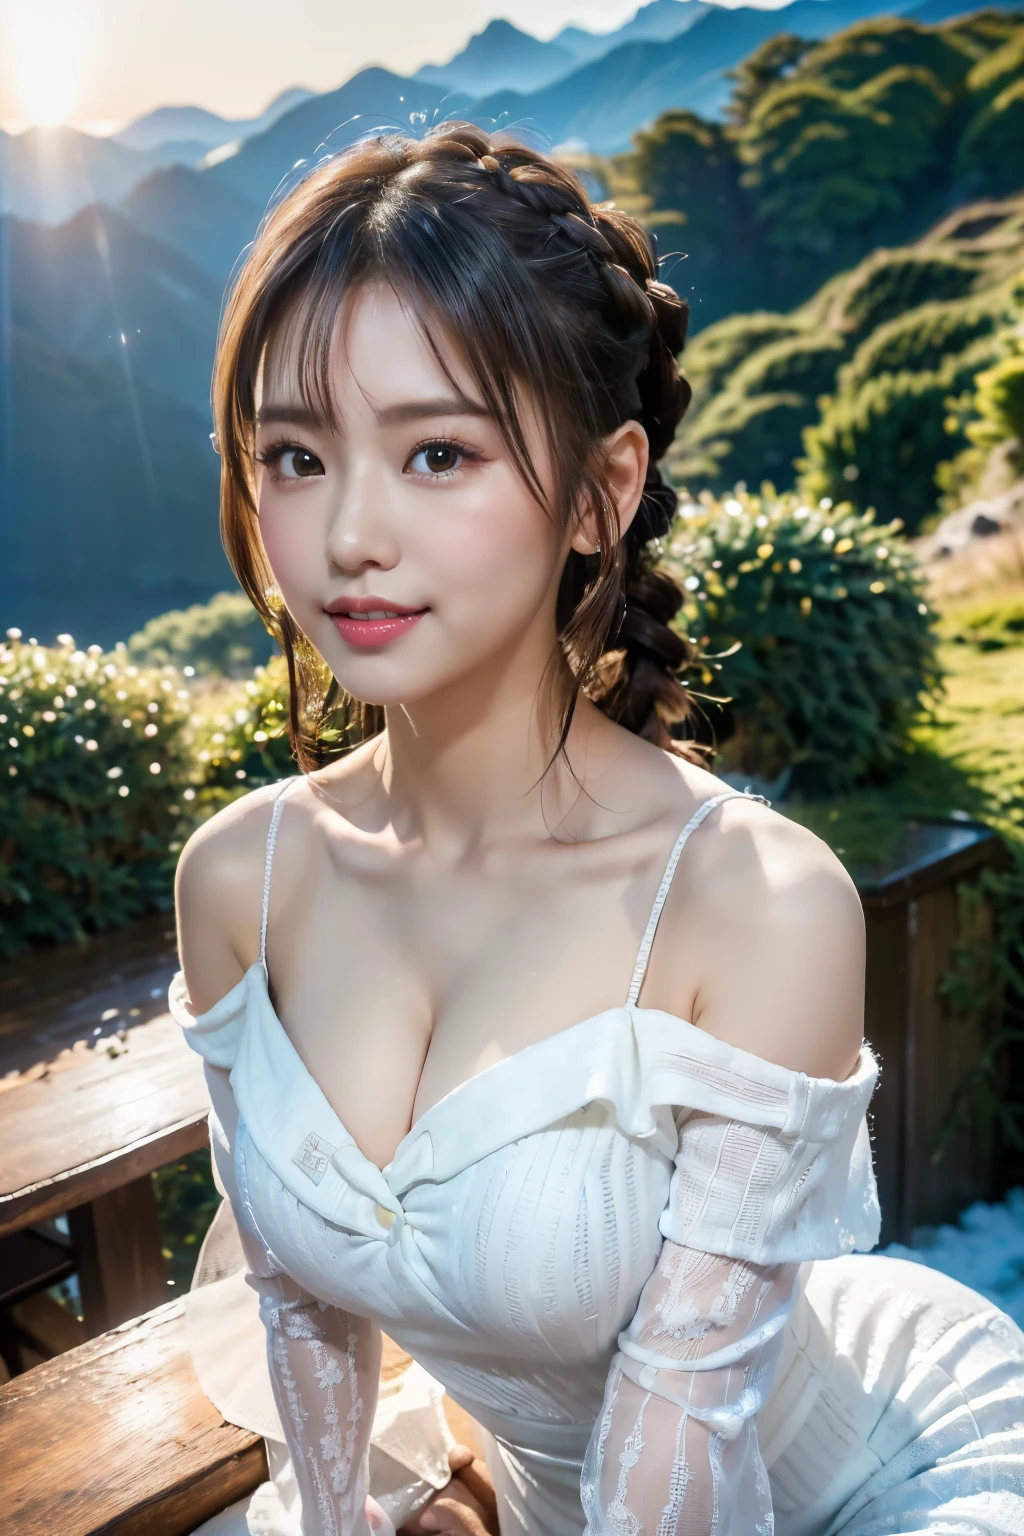 (Make your subject look three-dimensional with the contrast of light and shadow),(((With the sunset in the background))),(((Winter snowy mountain climbing scenery:1.3))),cute and beautiful adult woman,cute round face,cute smile,with blushing cheeks,red lips,(((Off-white off-shoulder knit tight dress:1.3))),black stockings,Knee-high boots,(silvery hair,floral braided headband,half up、floral braided space bun,voluminous fishtail braid,Twisted pan,),(The bangs are see-through bangs),hairpin,hair ornaments,(((emphasize the chest:1.3))),Breast flick,Detailed clothing characteristics,Detailed characteristics of hair,detailed facial features,(dynamic angle),(dynamic and sexy pose),professional lighting,cinematic light,(table top,highest quality,Ultra high resolution output image,) ,(8K quality,Depth of the bounds written,Anatomically accurate facial structure,),(sea art 2 mode:1.3),(Image mode Ultra HD,),(3D Realistic Photography:1.3)